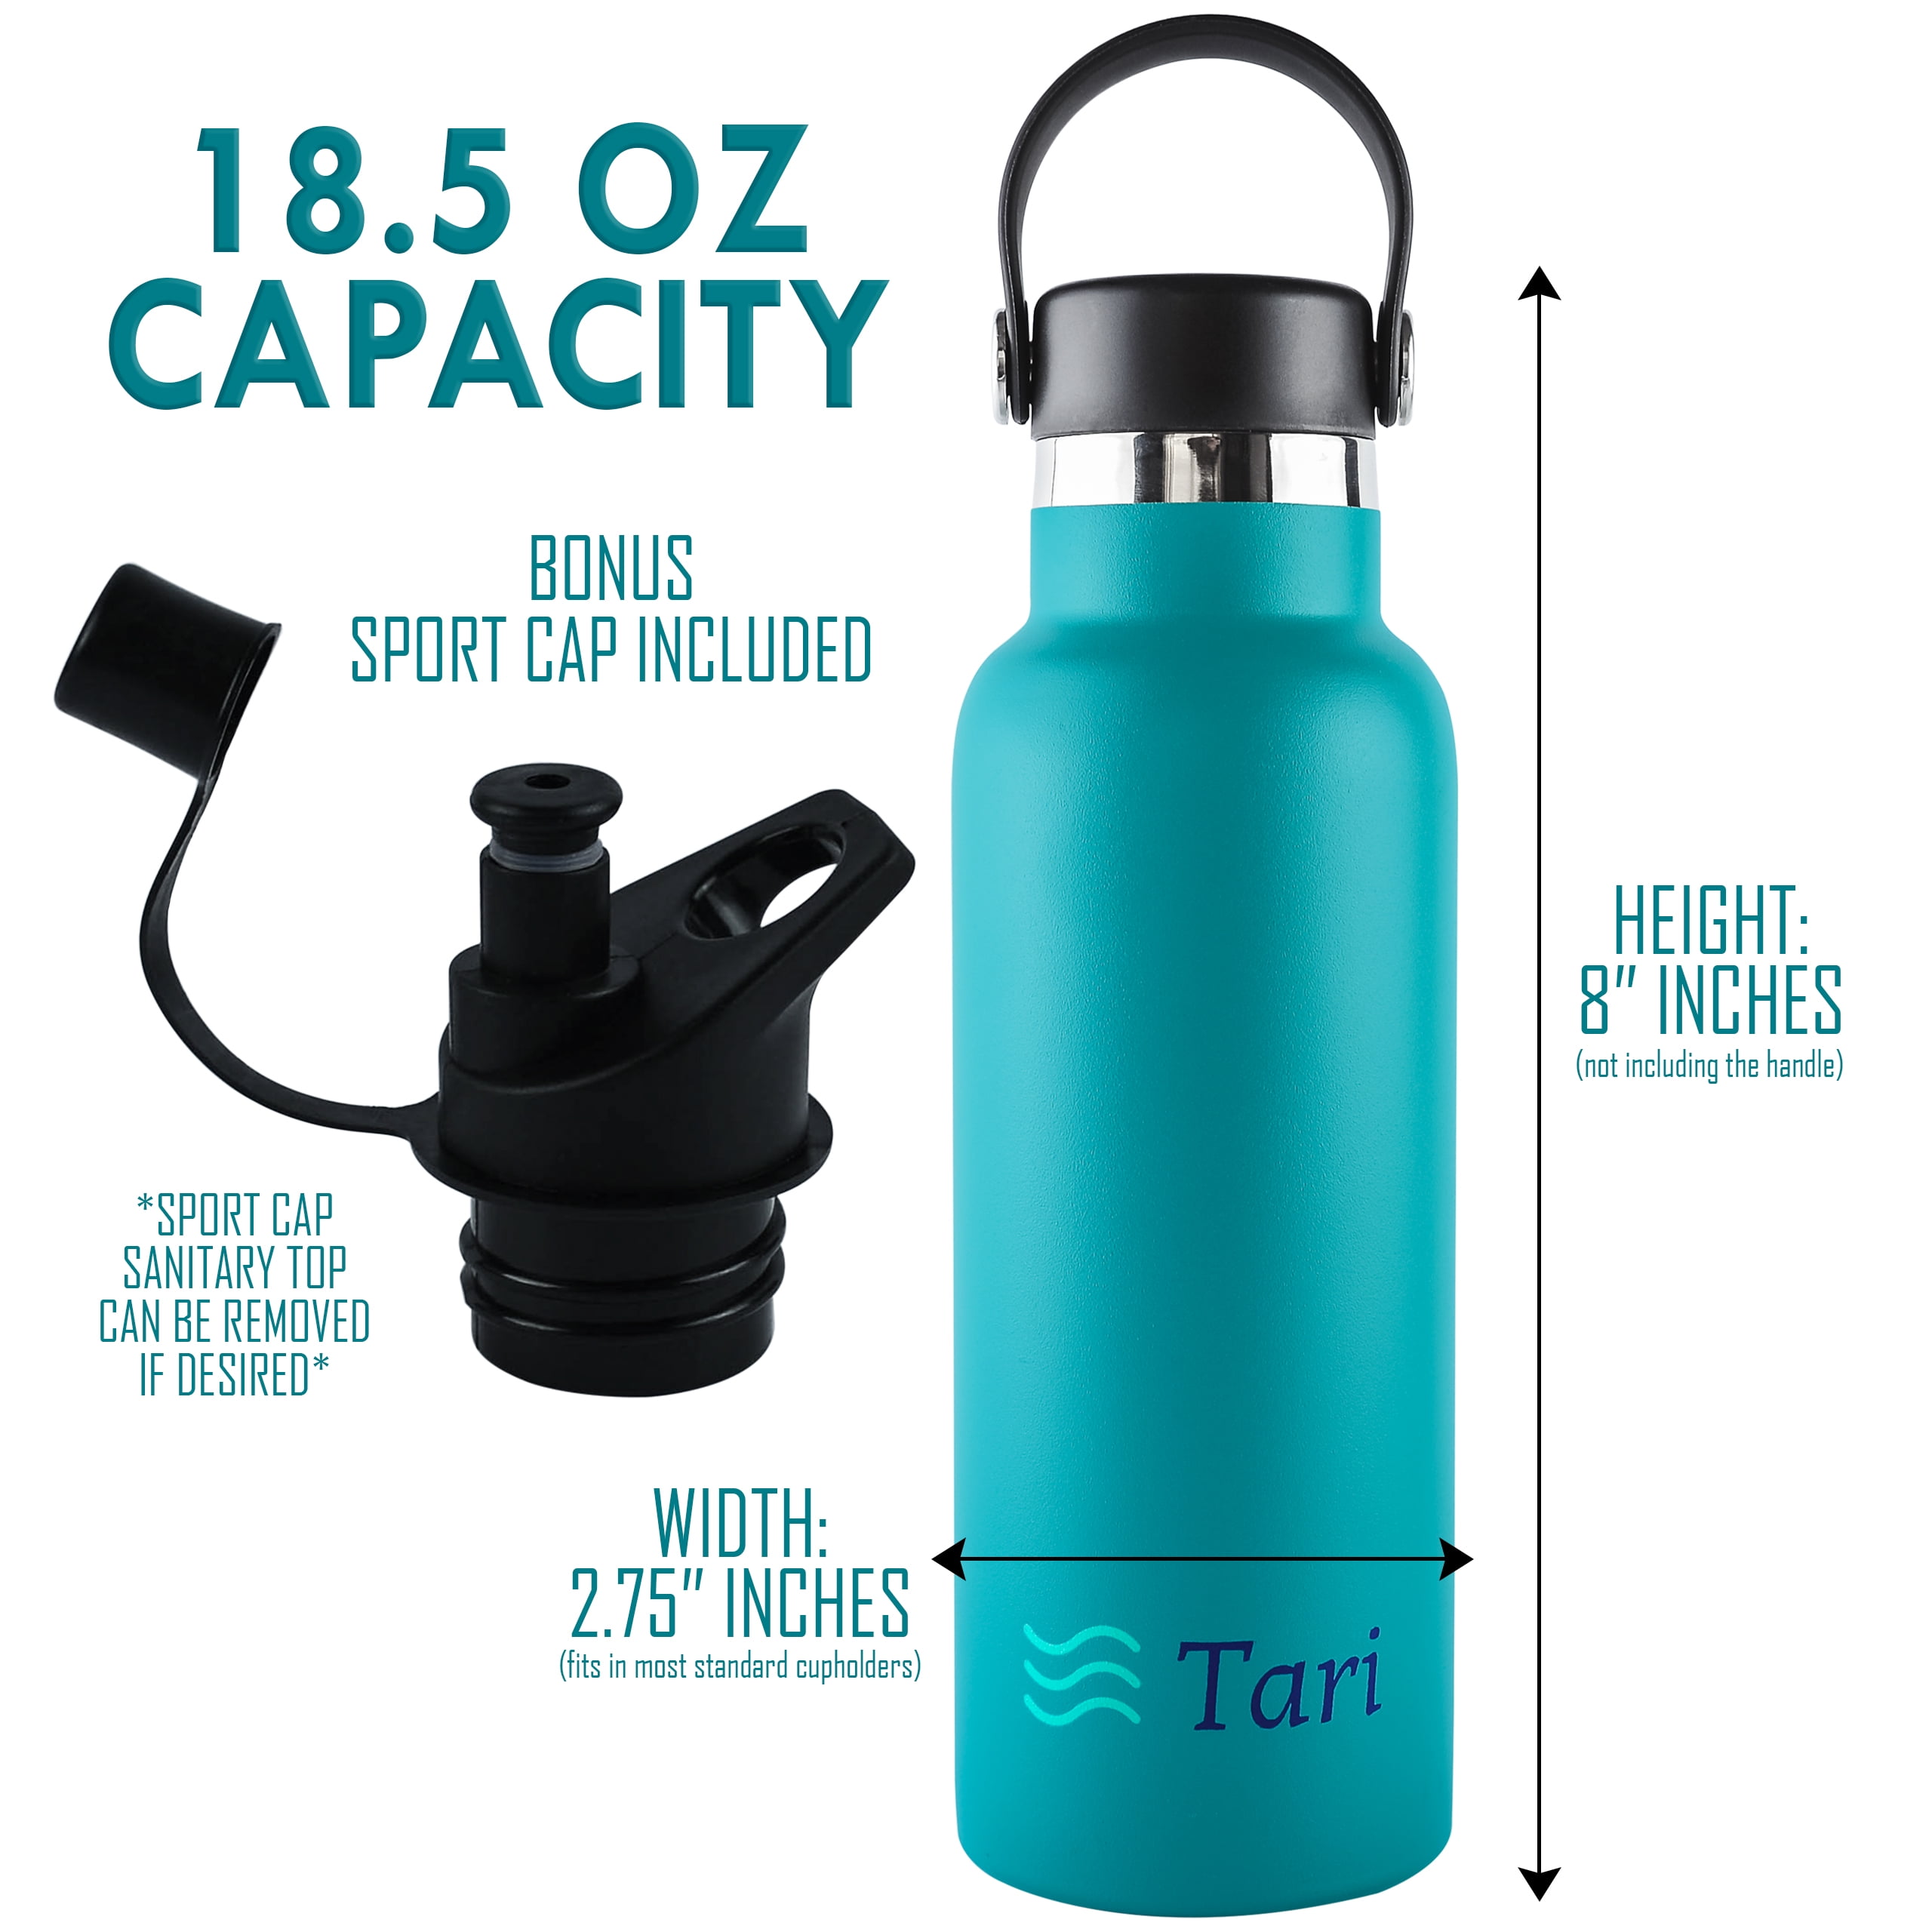 Bubba Trailblazer 24 oz Island Teal and Black Stainless Steel Water Bottle  with Wide Mouth Lid